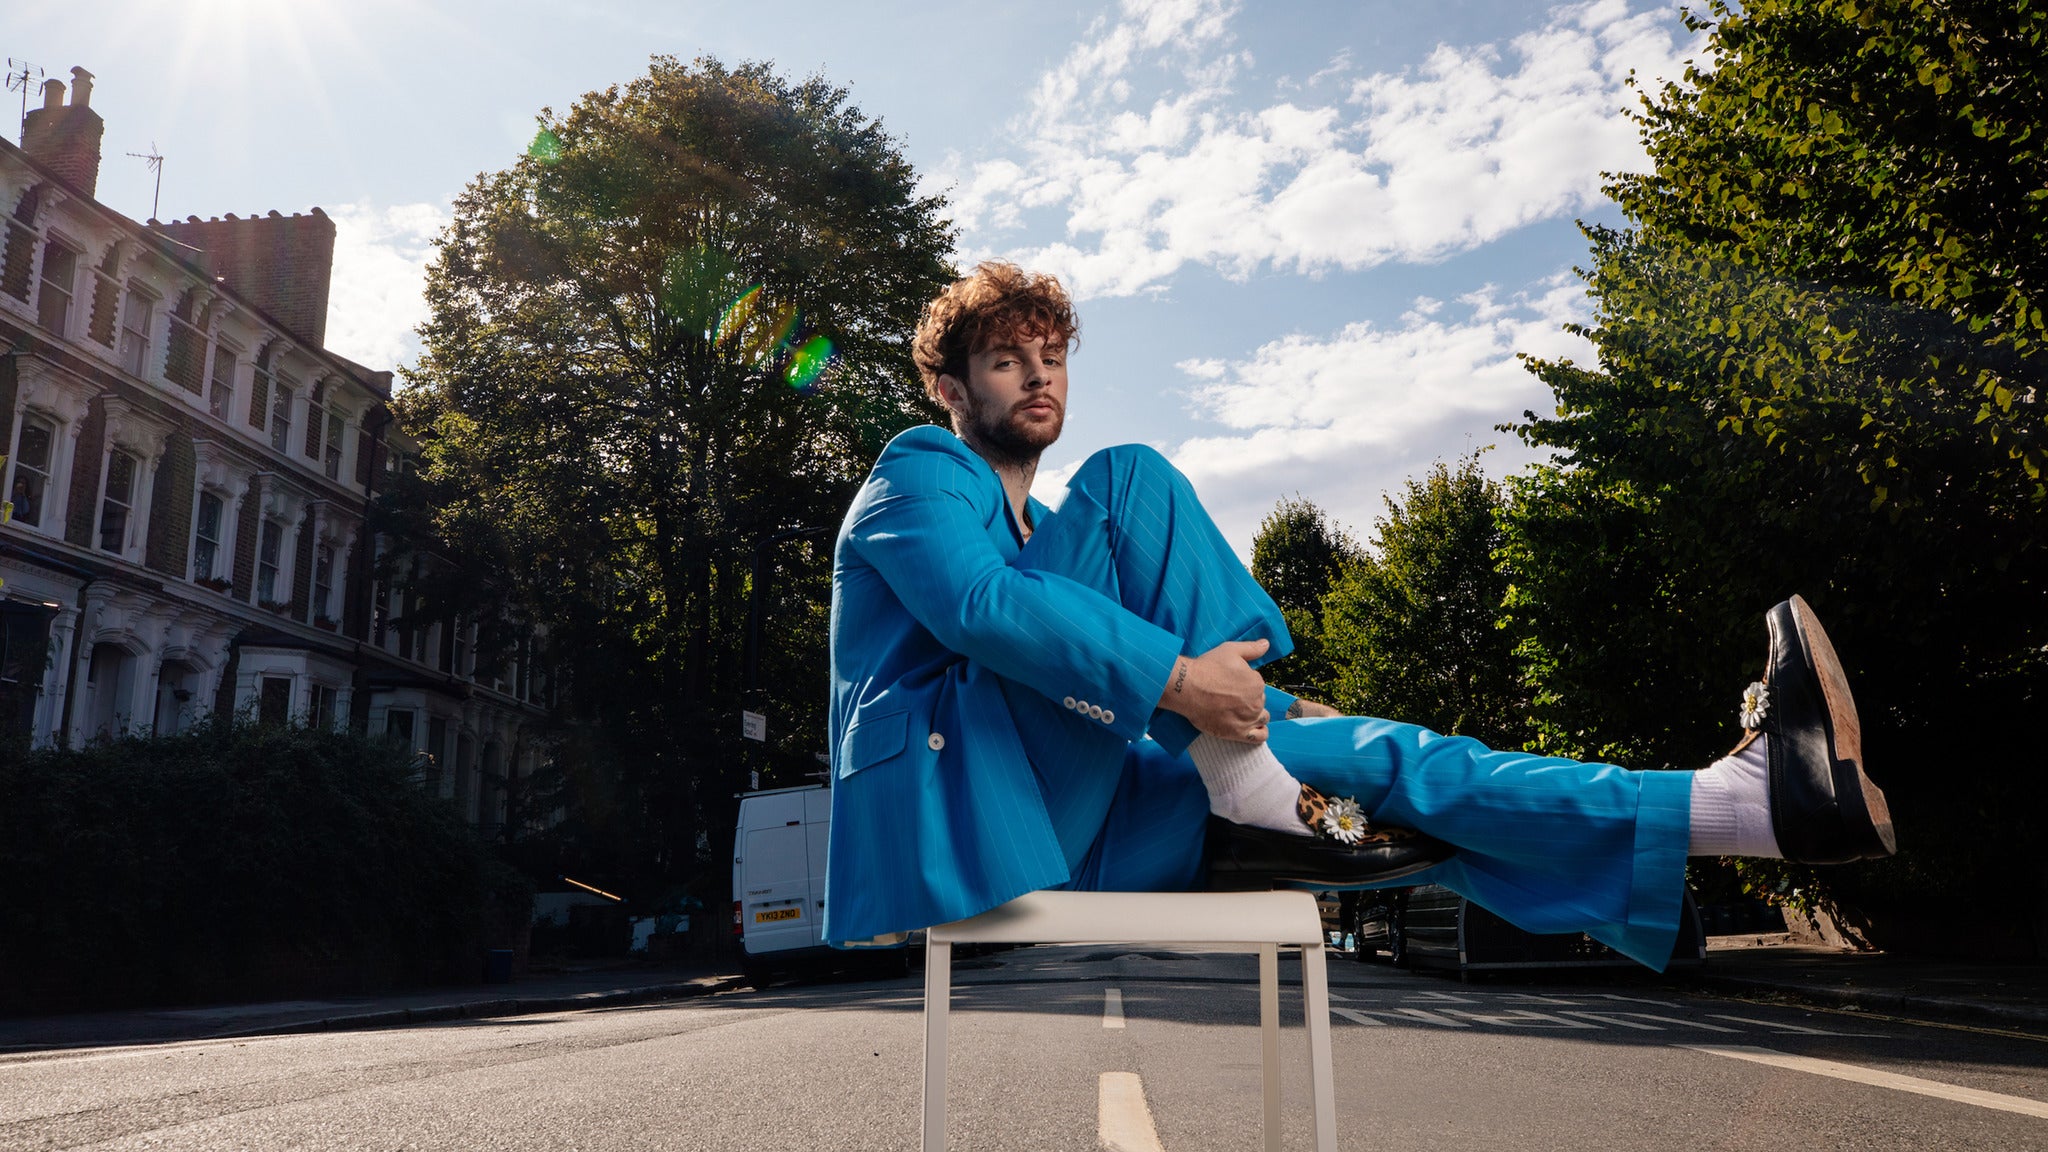 exclusive presale passcode for Festival Republic Presents Tom Grennan, Blossoms plus special guests tickets in London at Gunnersbury Park